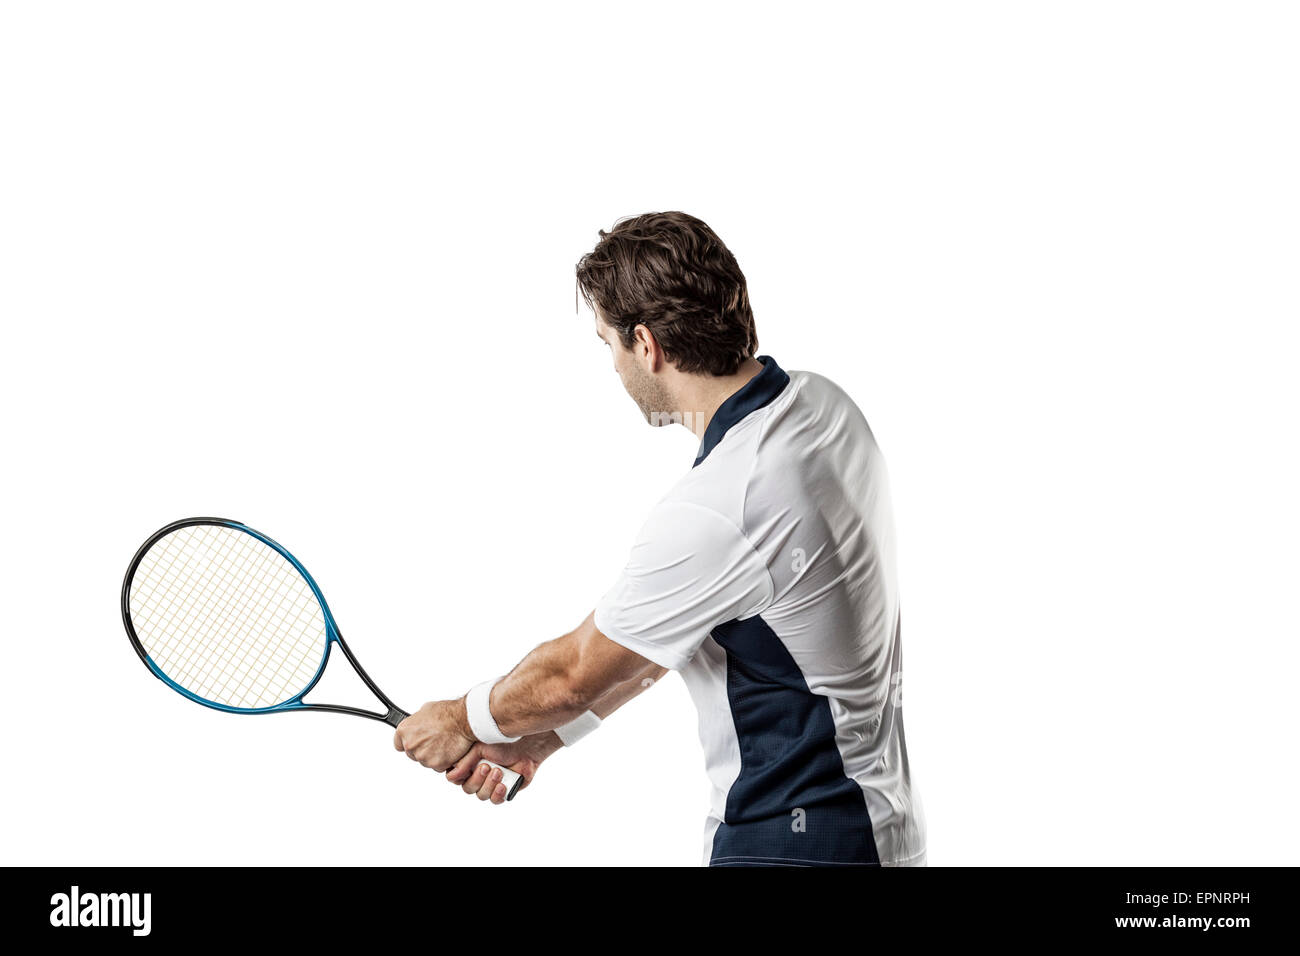 Tennis player on a white background. Stock Photo